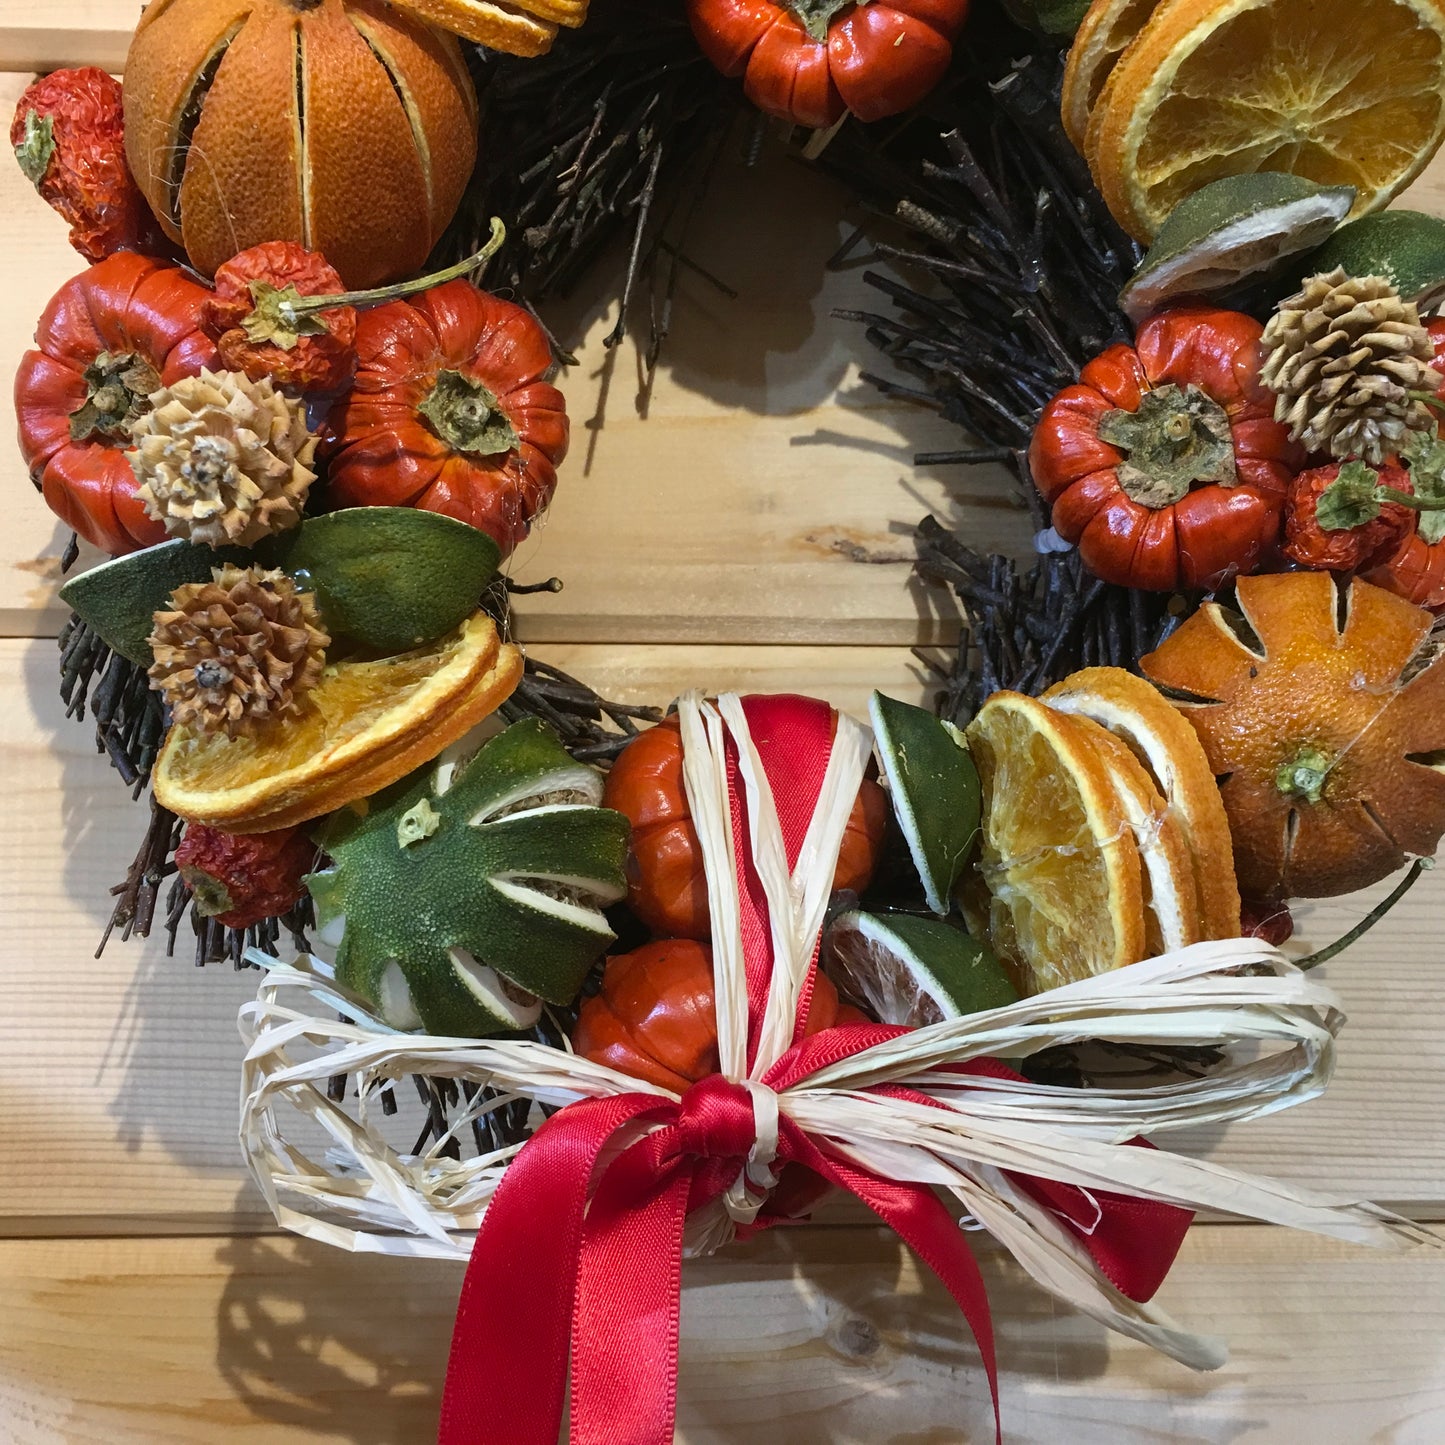 Circle shaped twig wreath that has been beautifully decorated with an assortment of dried fruits, cinnamon sticks and pine cones, and scented with a wonderful Christmas fragrance. With an additional decorative red bow and hanger.